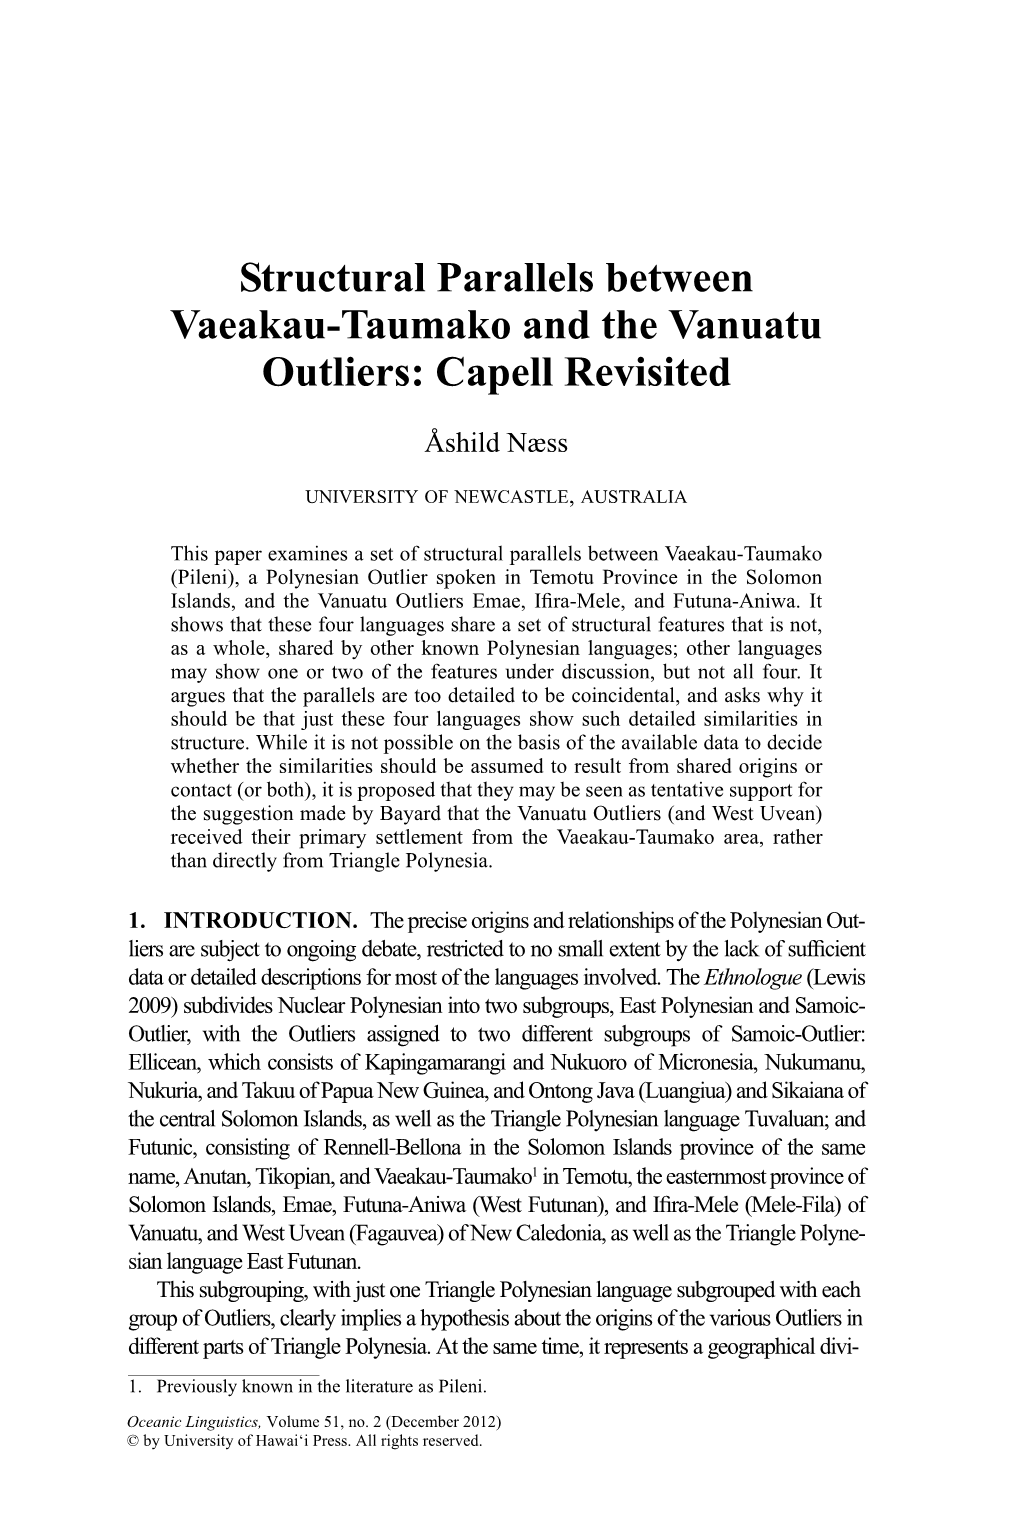 Structural Parallels Between Vaeakau-Taumako and the Vanuatu Outliers: Capell Revisited